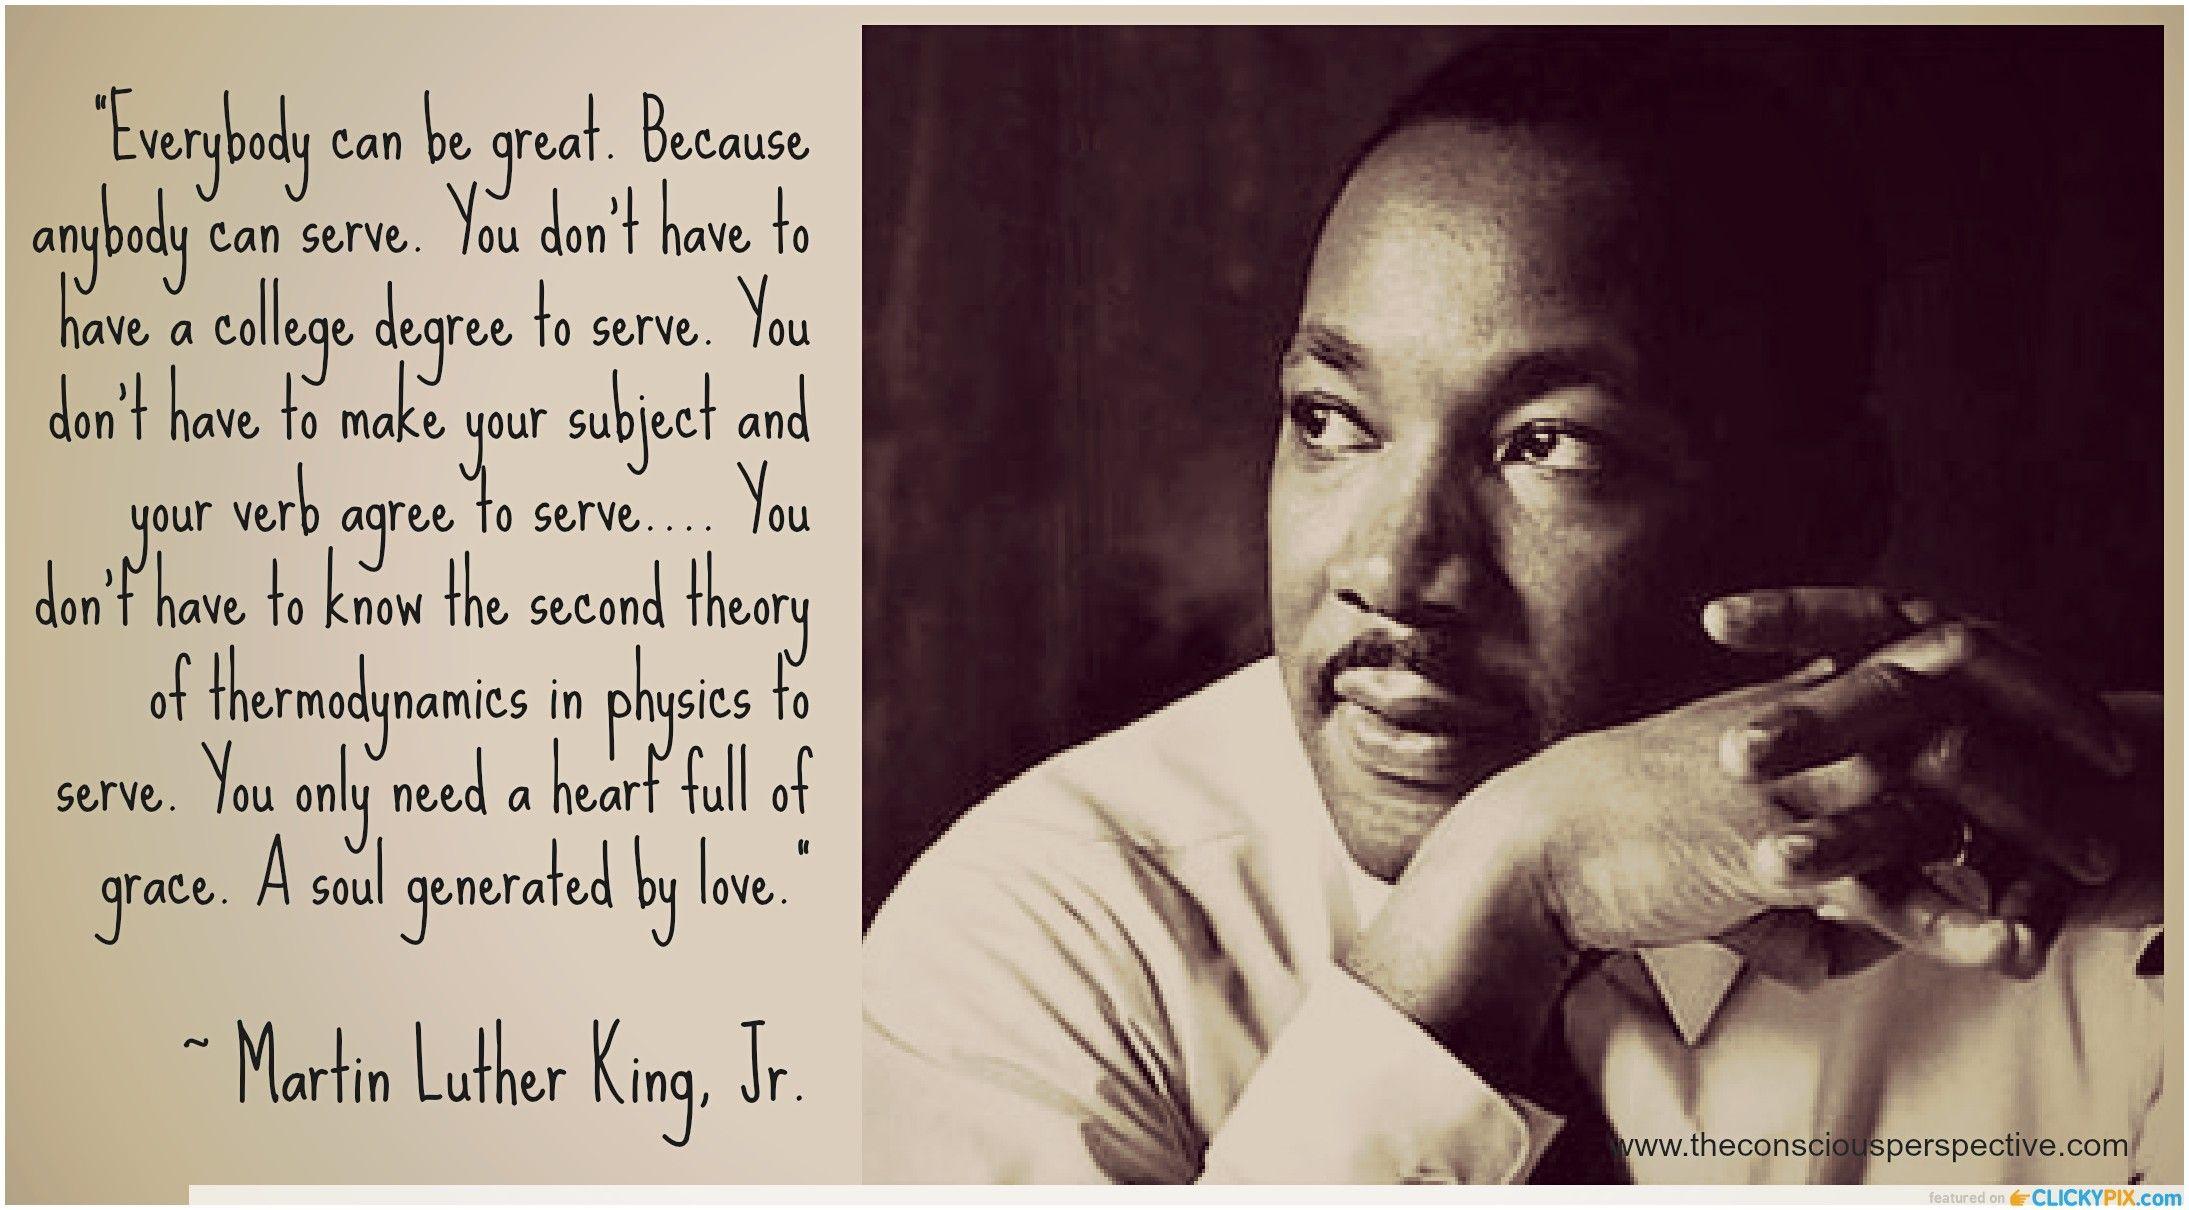 Love life Martin luther king Best quotes about life dream martin